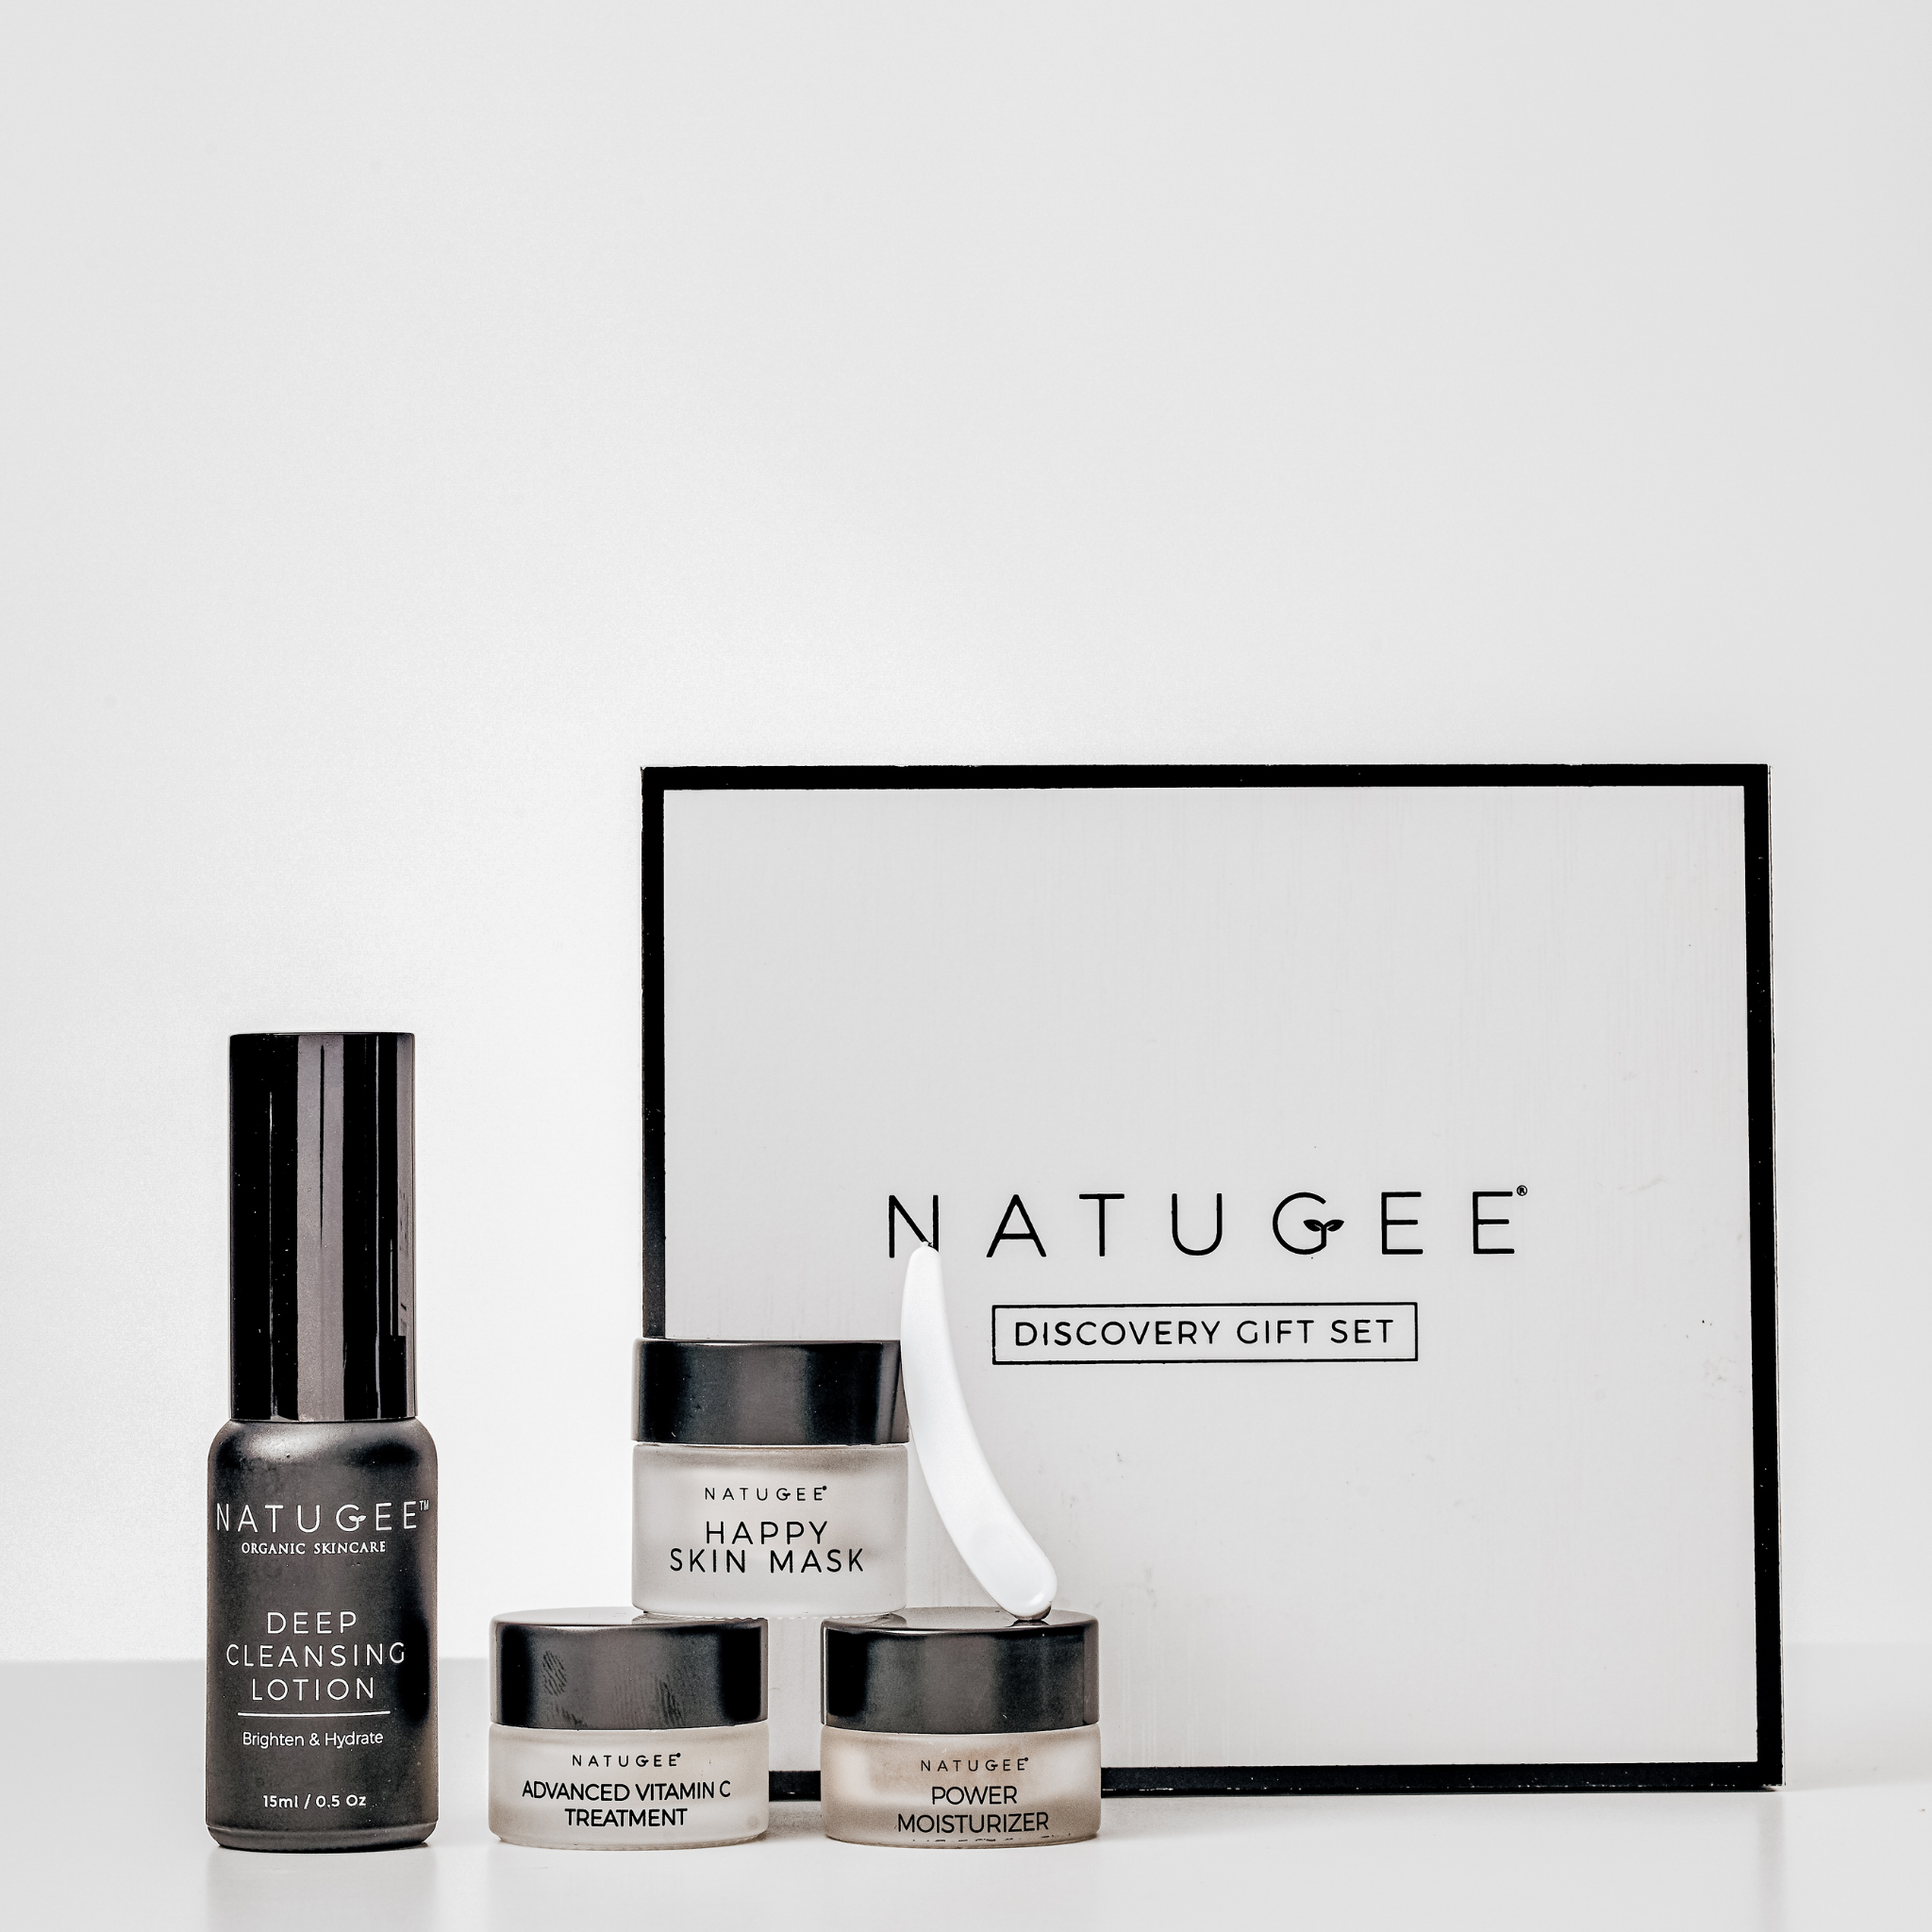 DISCOVERY GIFT SET - Natugee